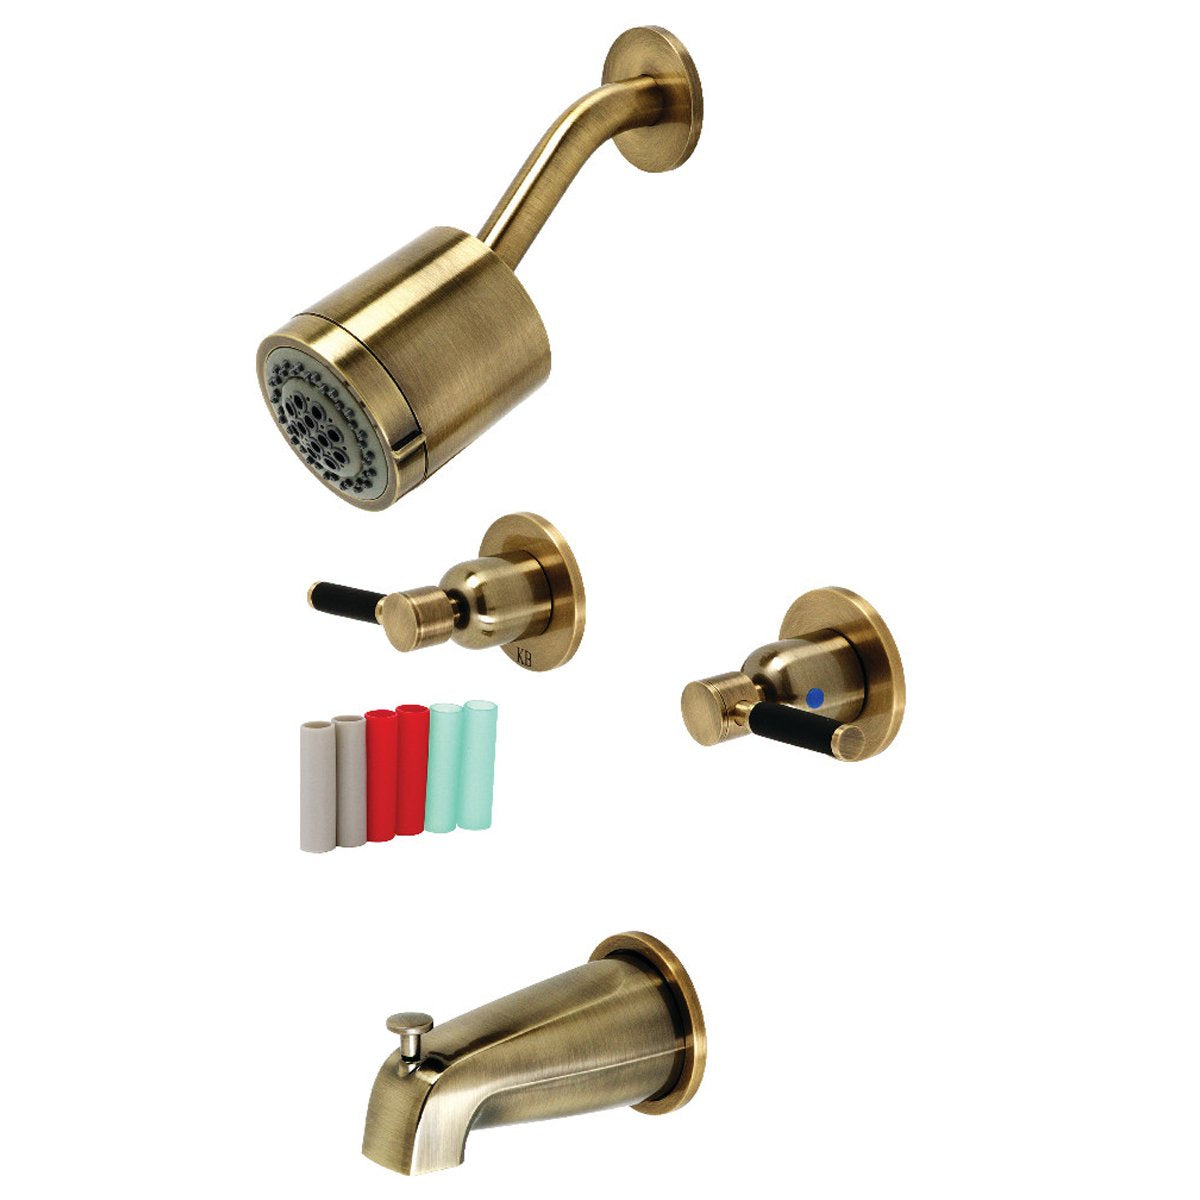 Kingston Brass Kaiser Two-Handle Tub and Shower Faucet